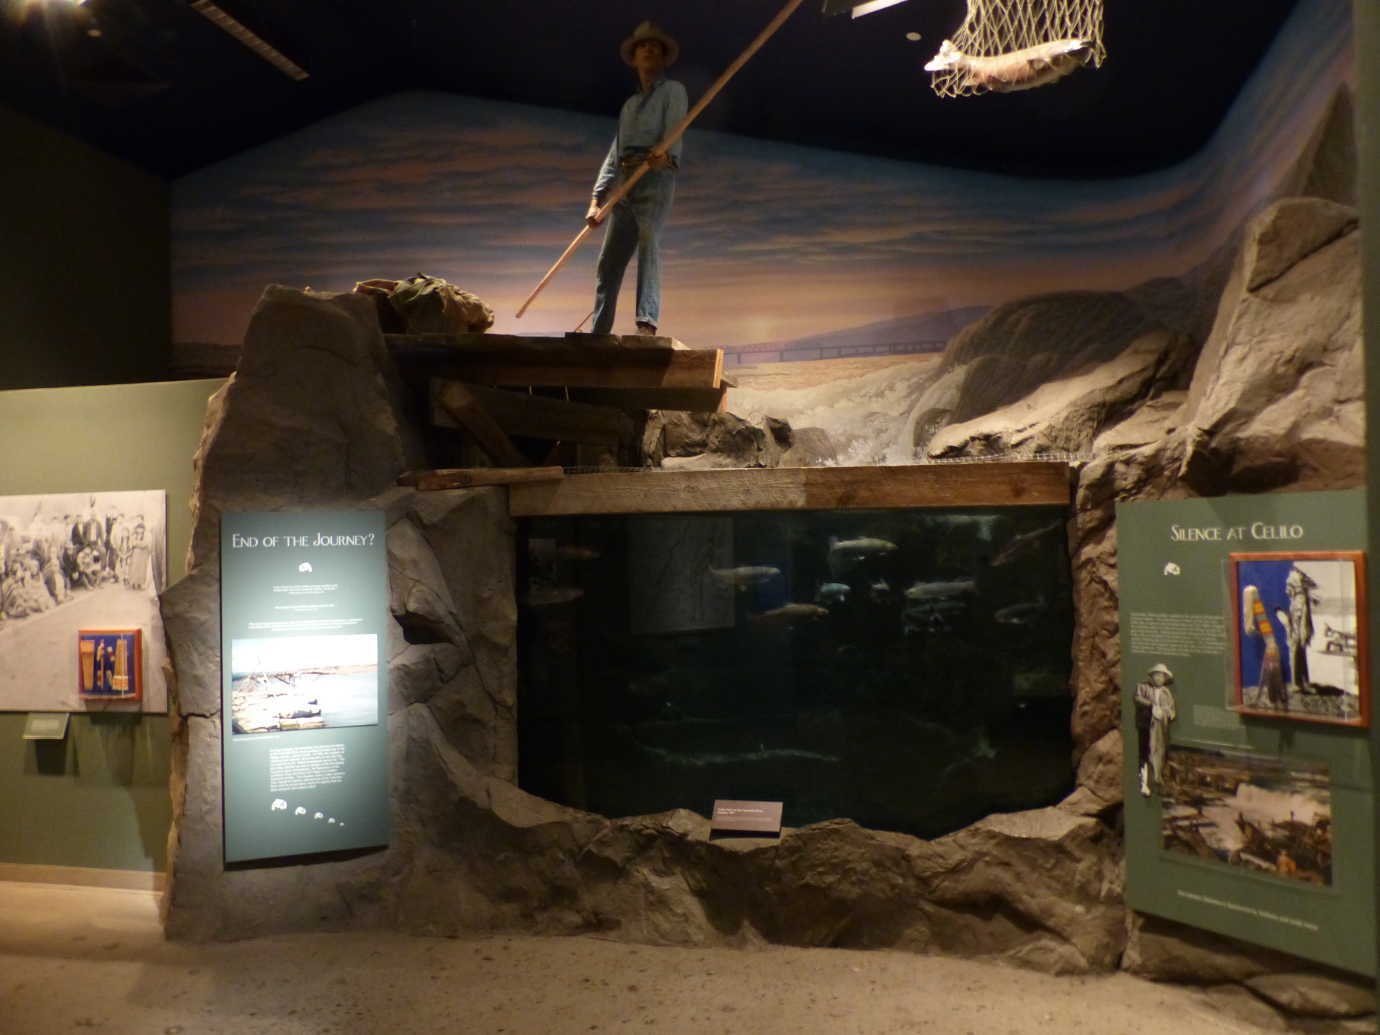 Celilo Falls on the Columbia River, depicted in the High Desert museum’s *By Hand Through Memory* permanent exhibition. The museum is known for embedding their living collection within their exhibitions—in this example, there are native trout, sturgeon, and salmon. Image courtesy of the High Desert Museum.